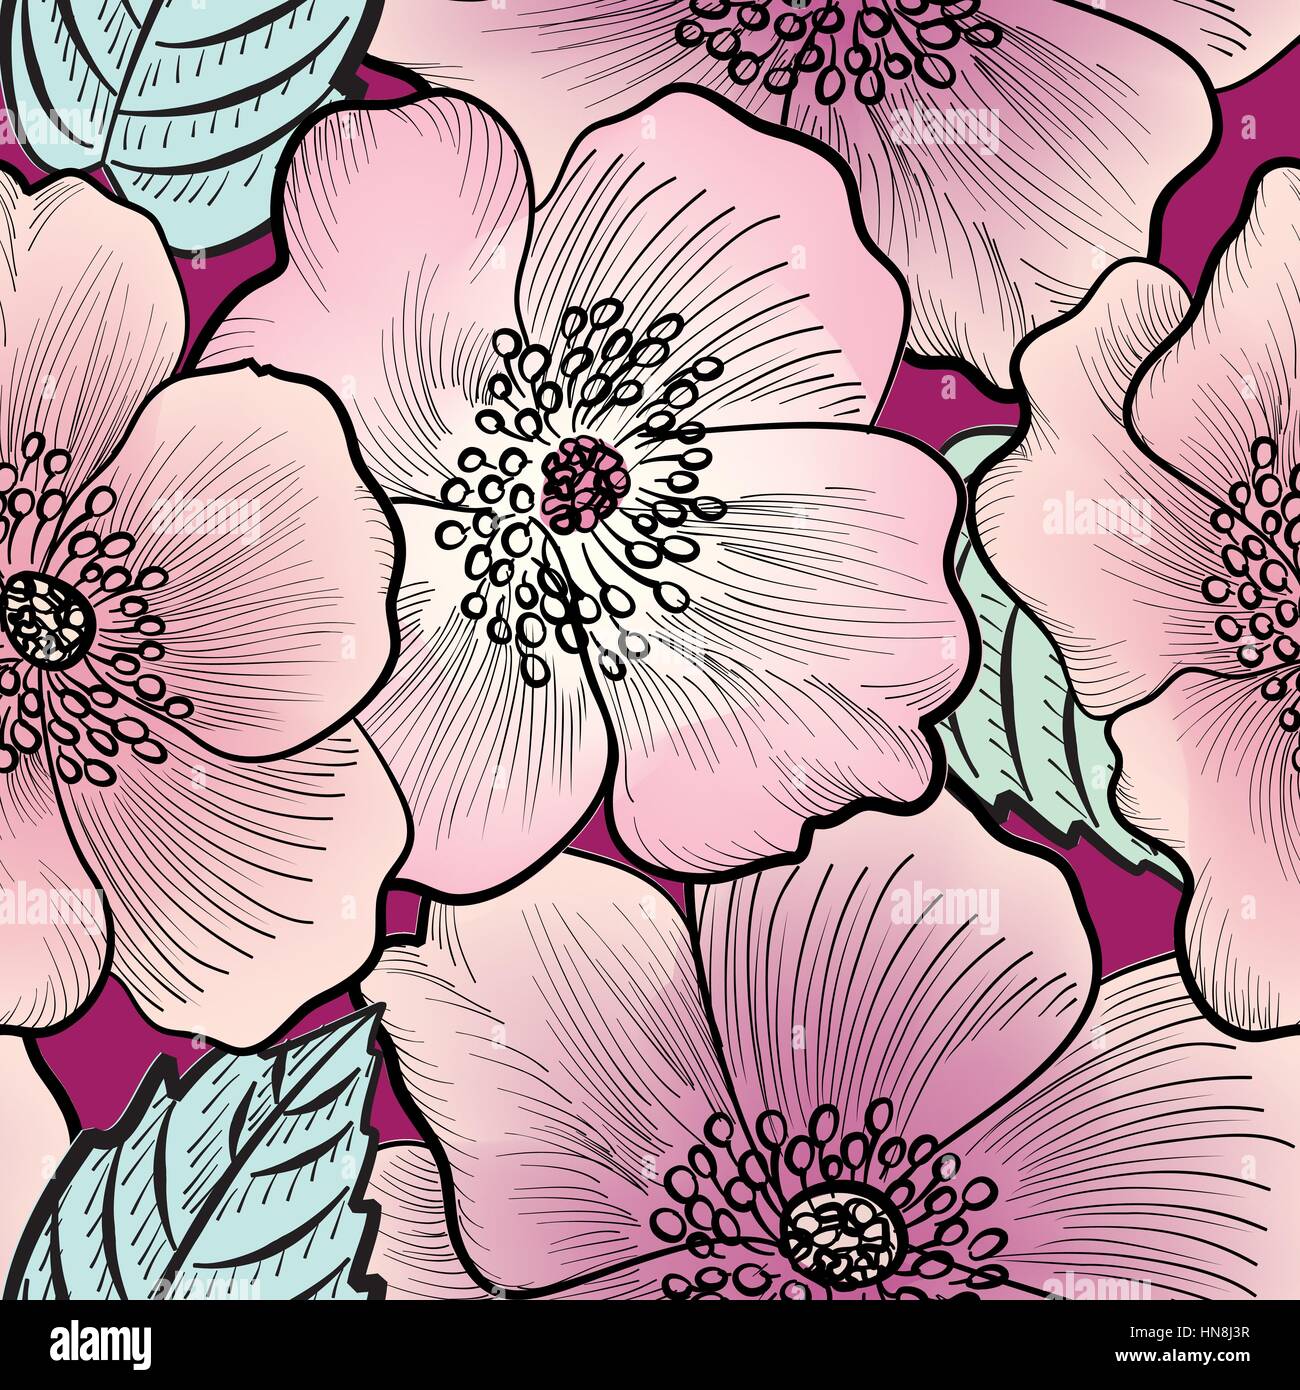 Floral seamless pattern. Flower background. Floral seamless texture with flowers. Stock Vector